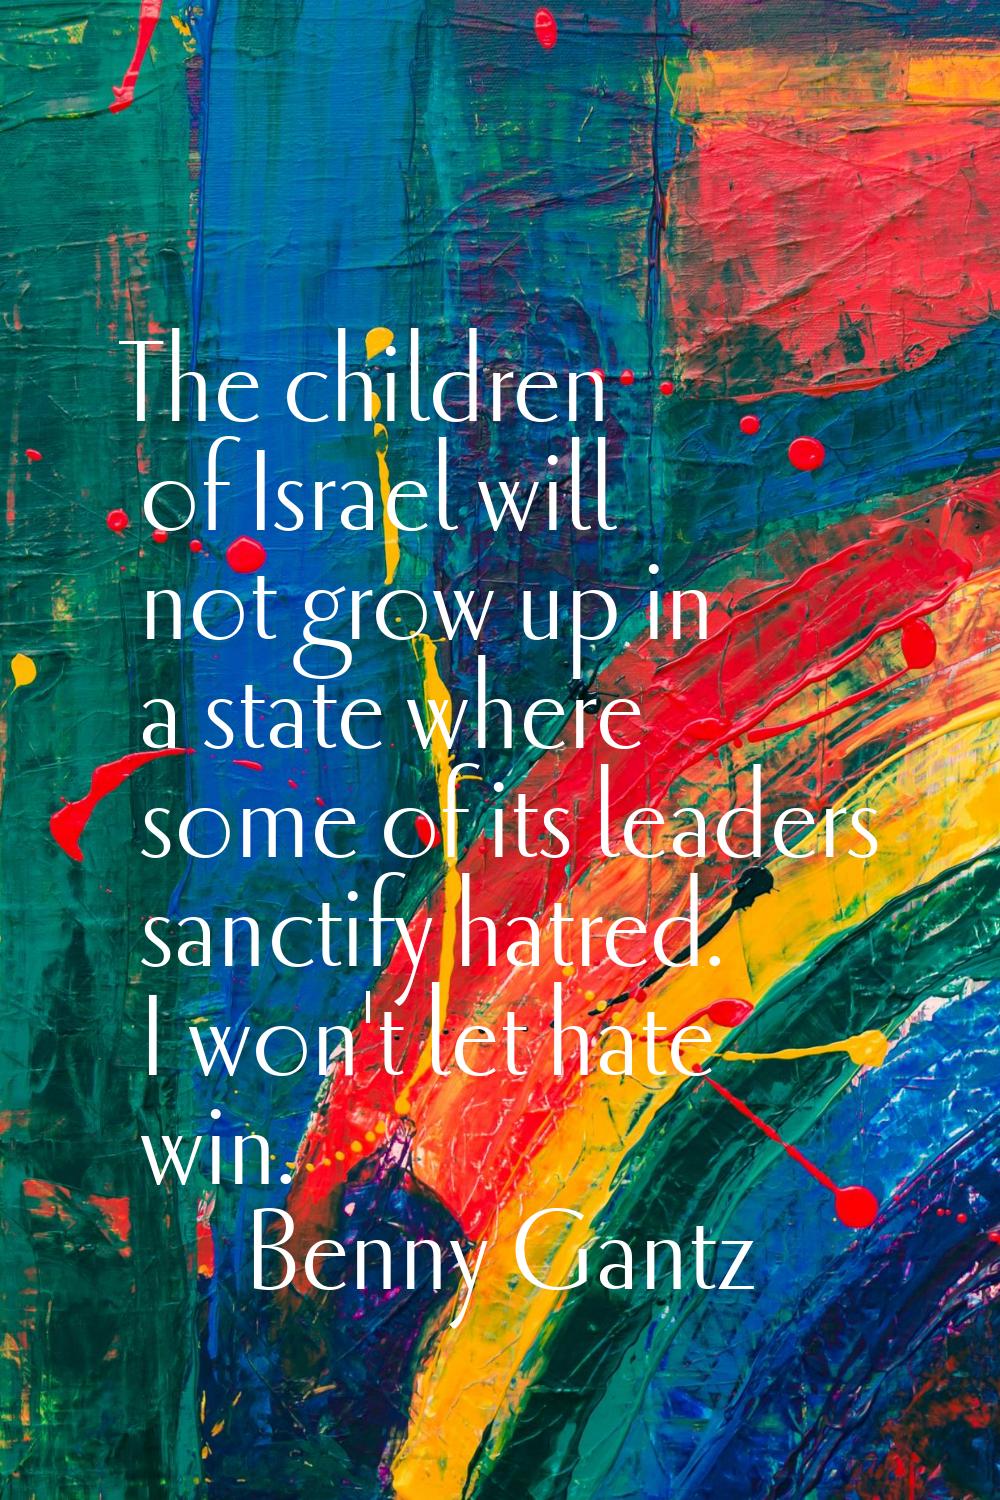 The children of Israel will not grow up in a state where some of its leaders sanctify hatred. I won